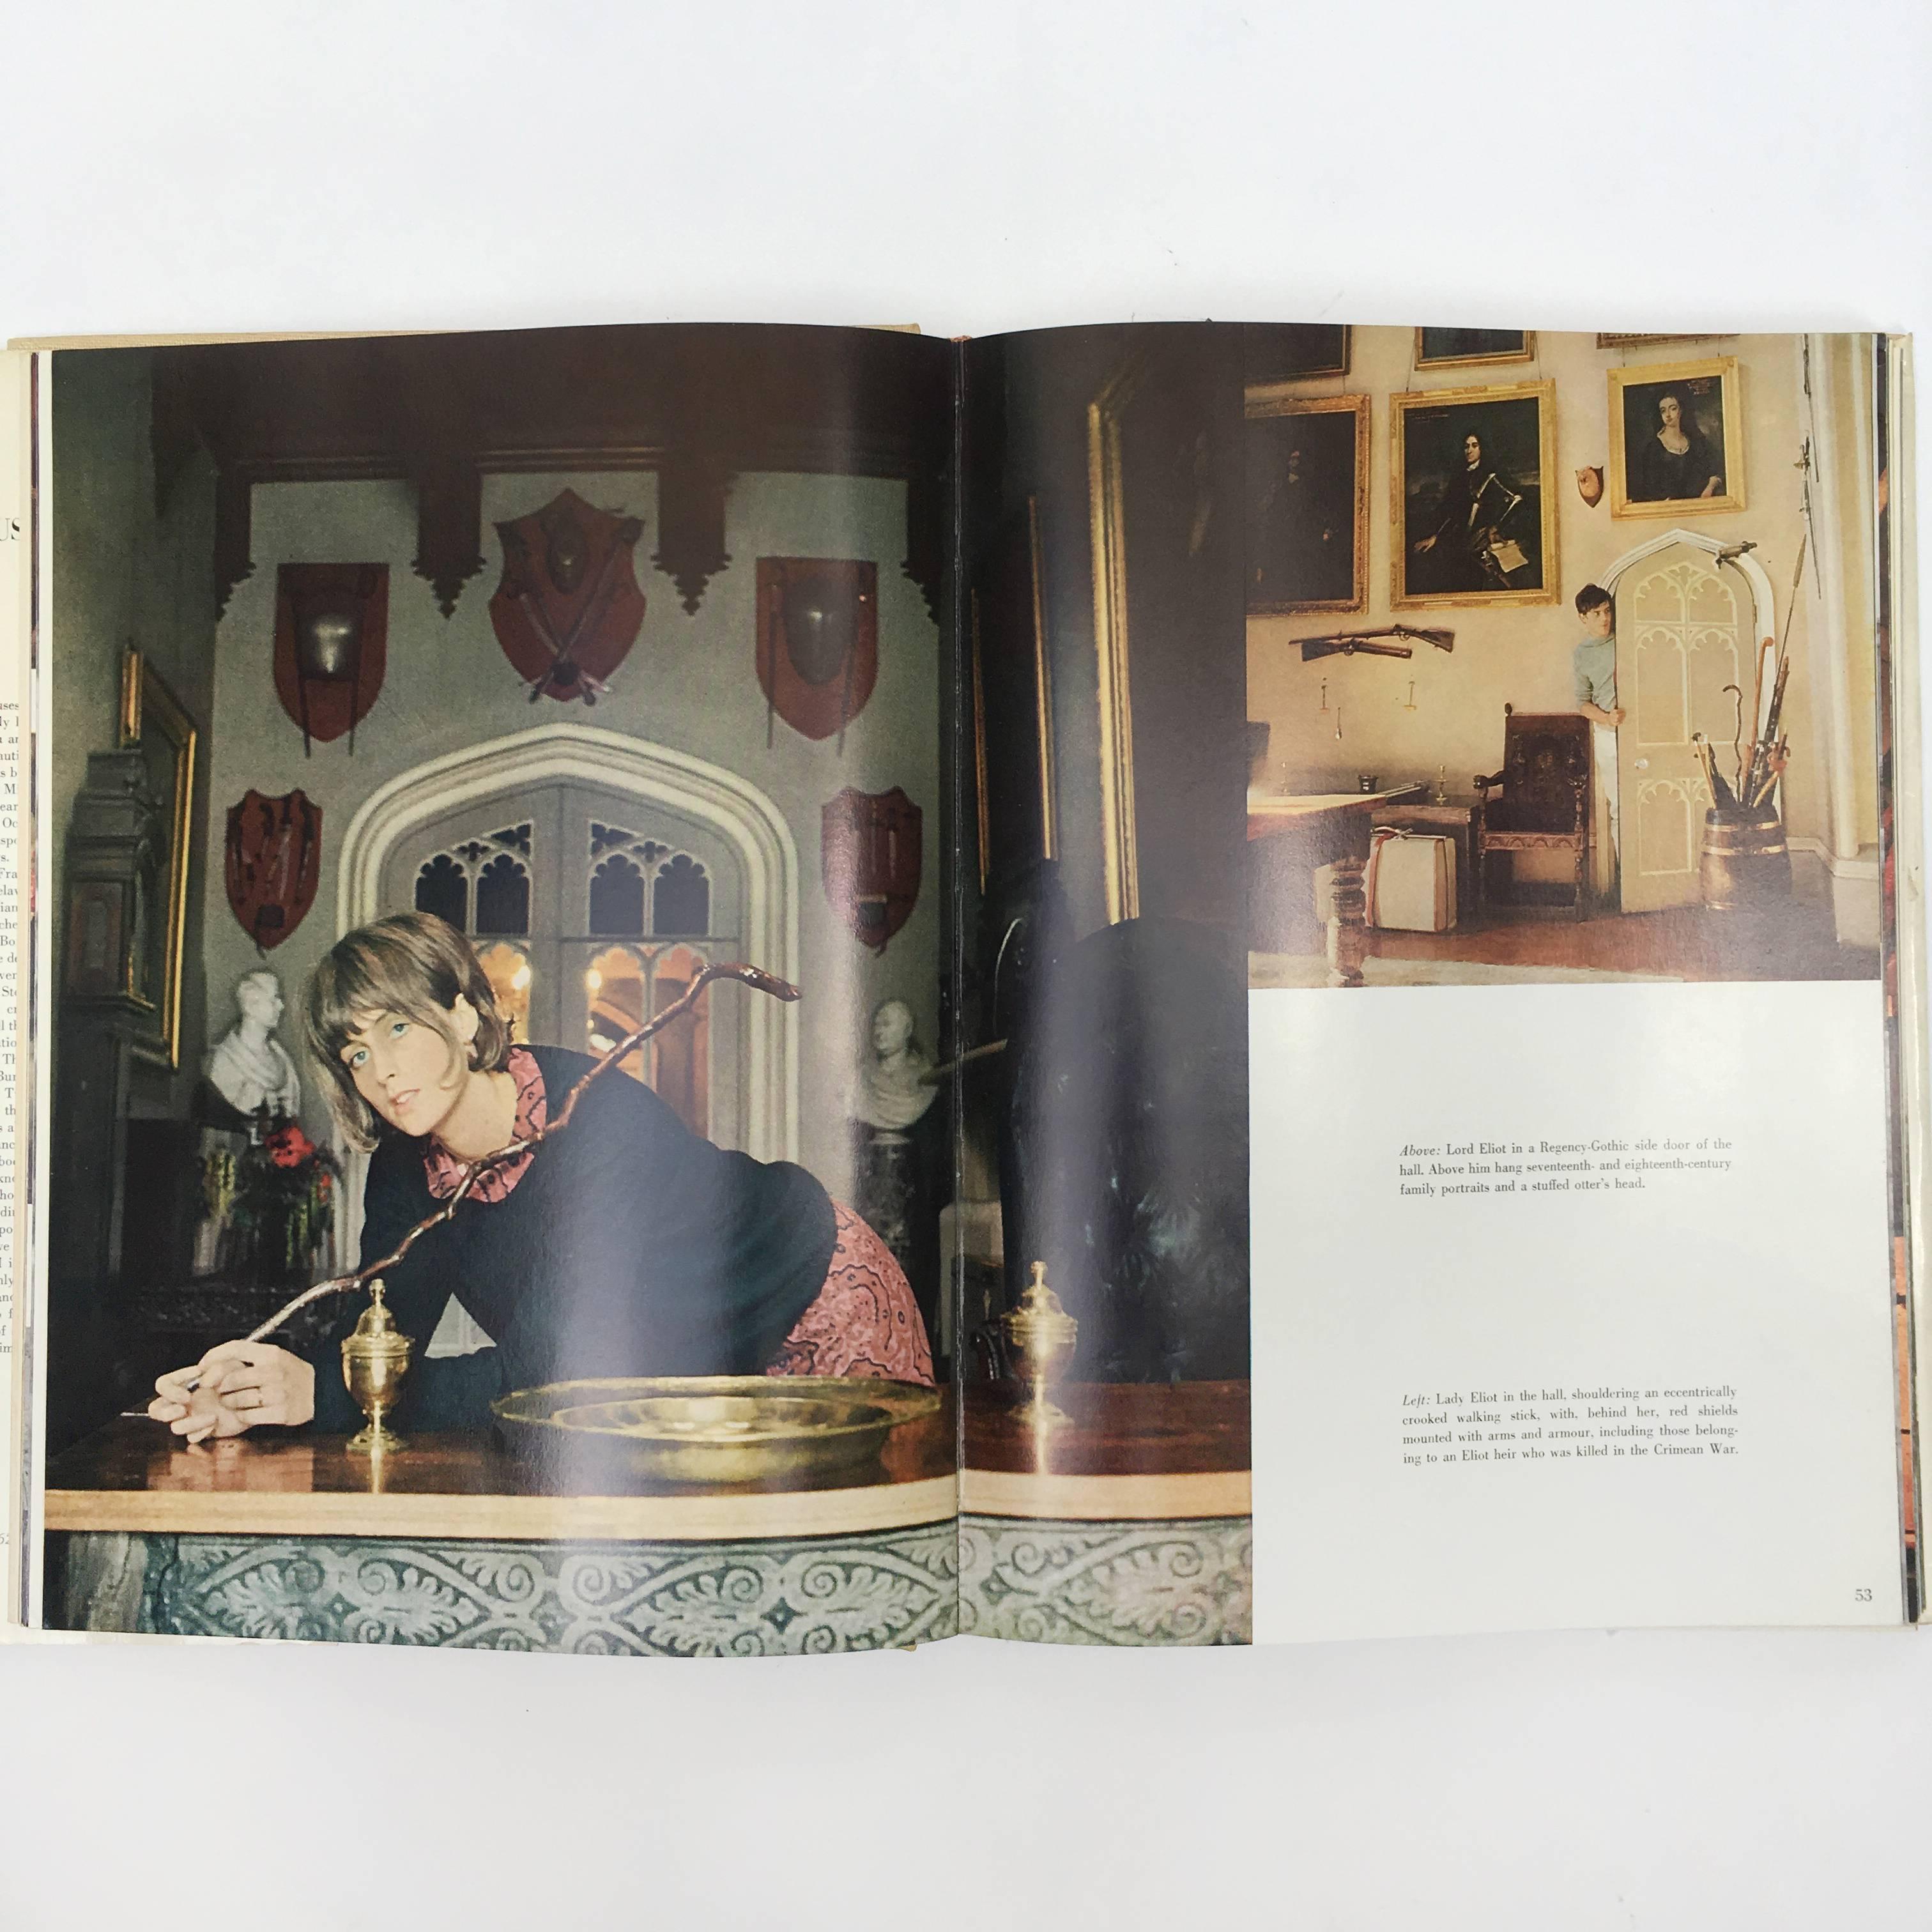 First edition, published by the Viking Press, New York in 1968.

A collection of interior photos and portraits featuring the opulent houses and affluent people of the 1960s, photographed by the renowned fashion photographer Horst P. Horst with a